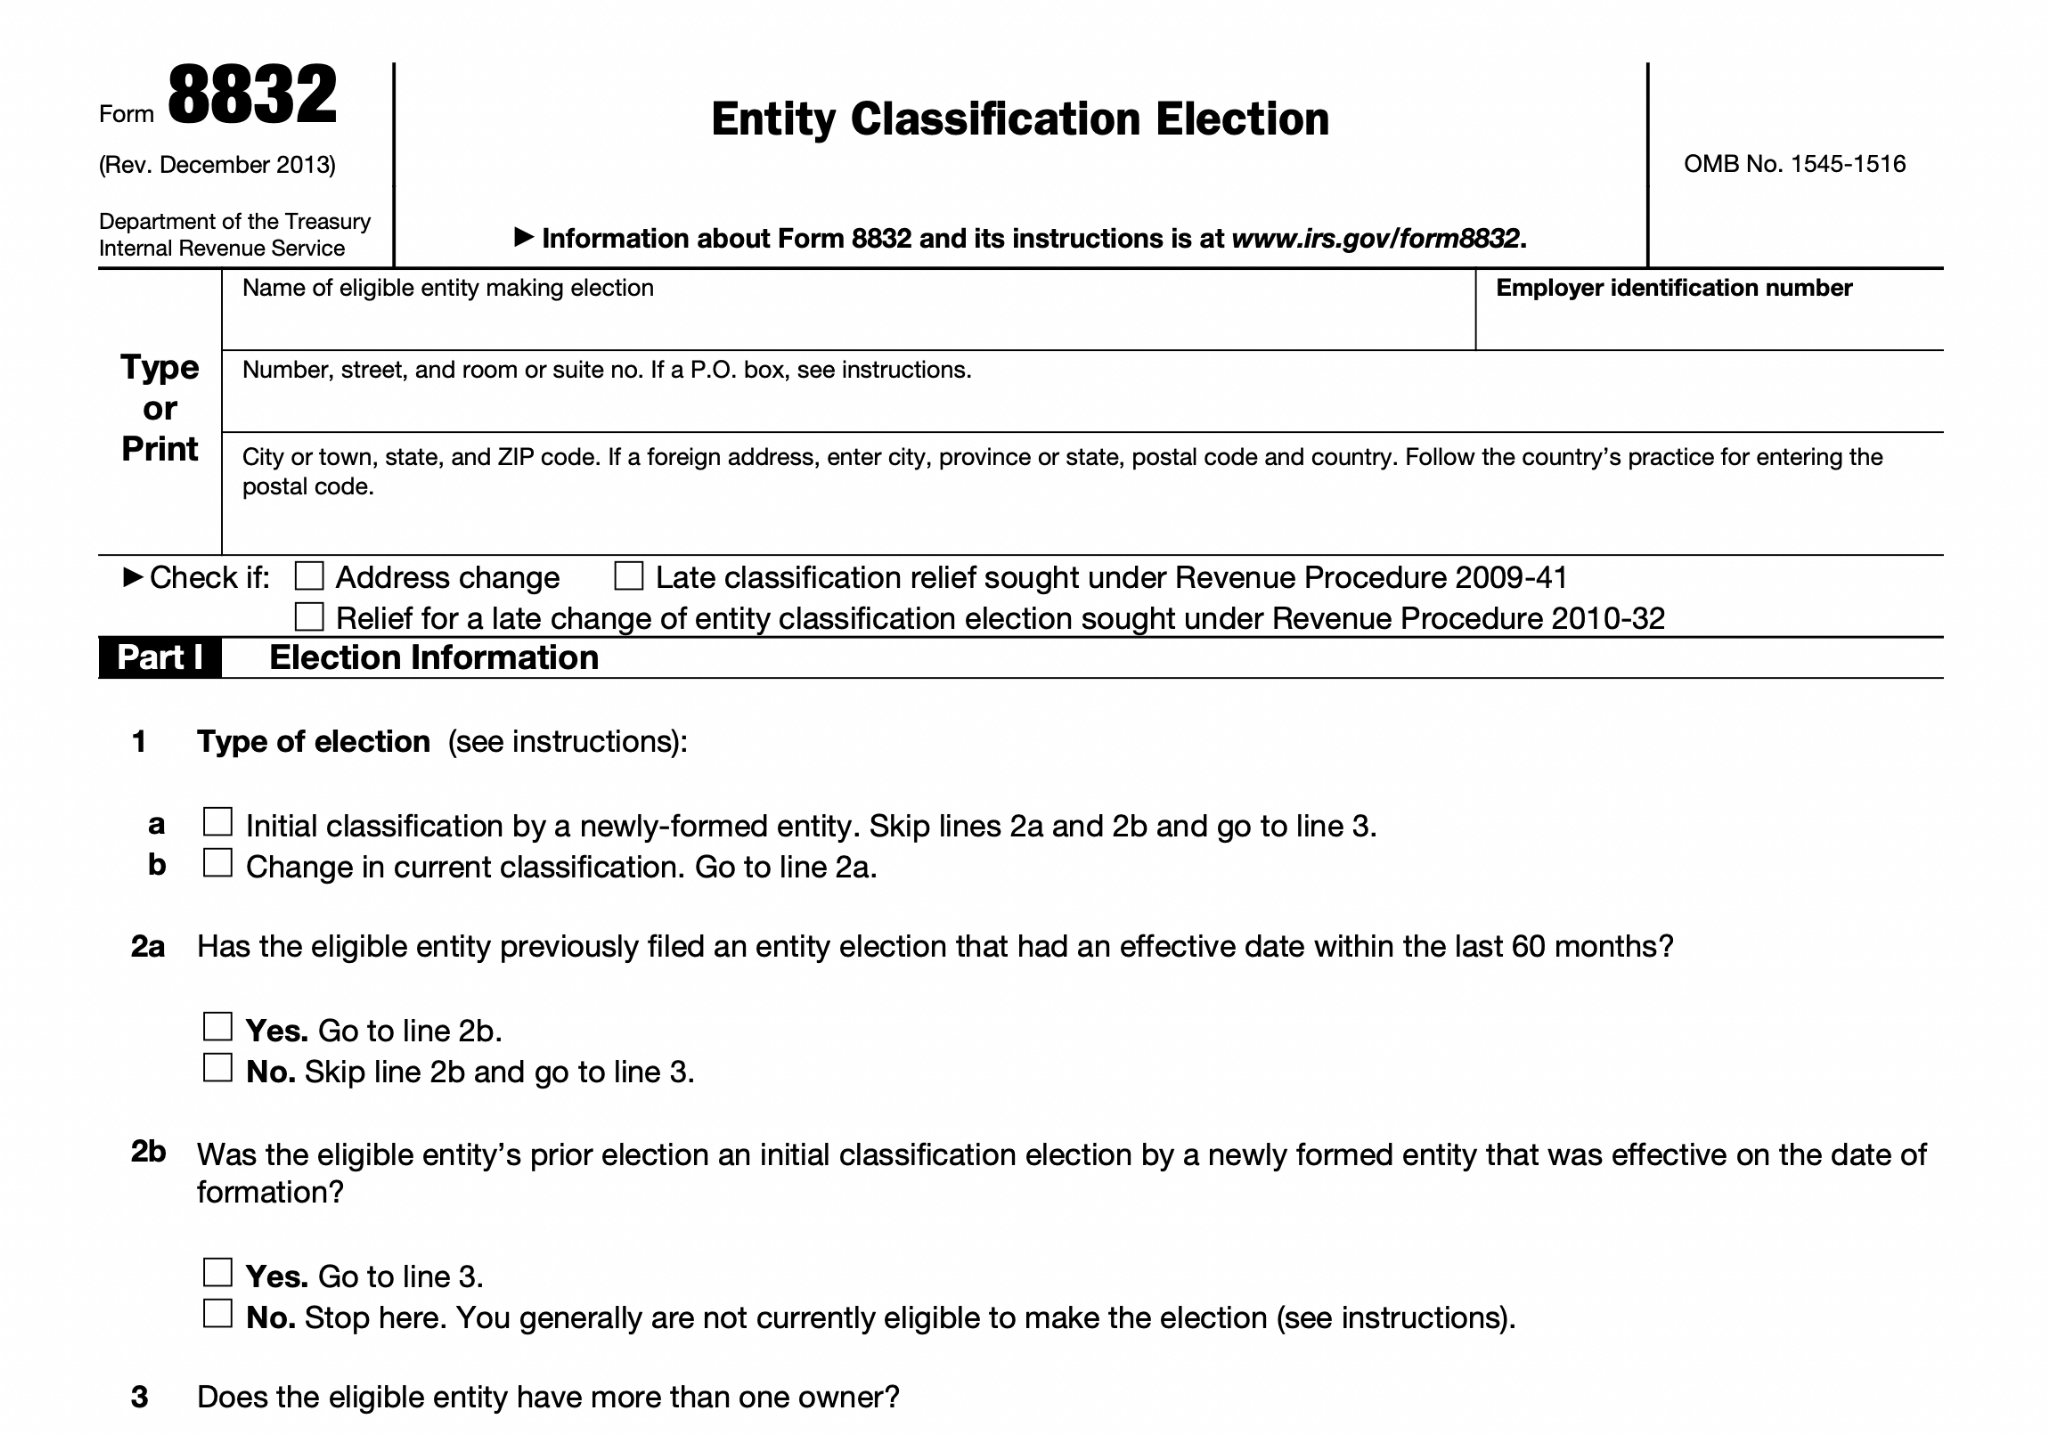 Form 8832 for Entity Classification Election by the Department of Treasury, IRS. Information about eligible entity, election type, and prior election. Taxes, self-employed, 1099, freelancer.